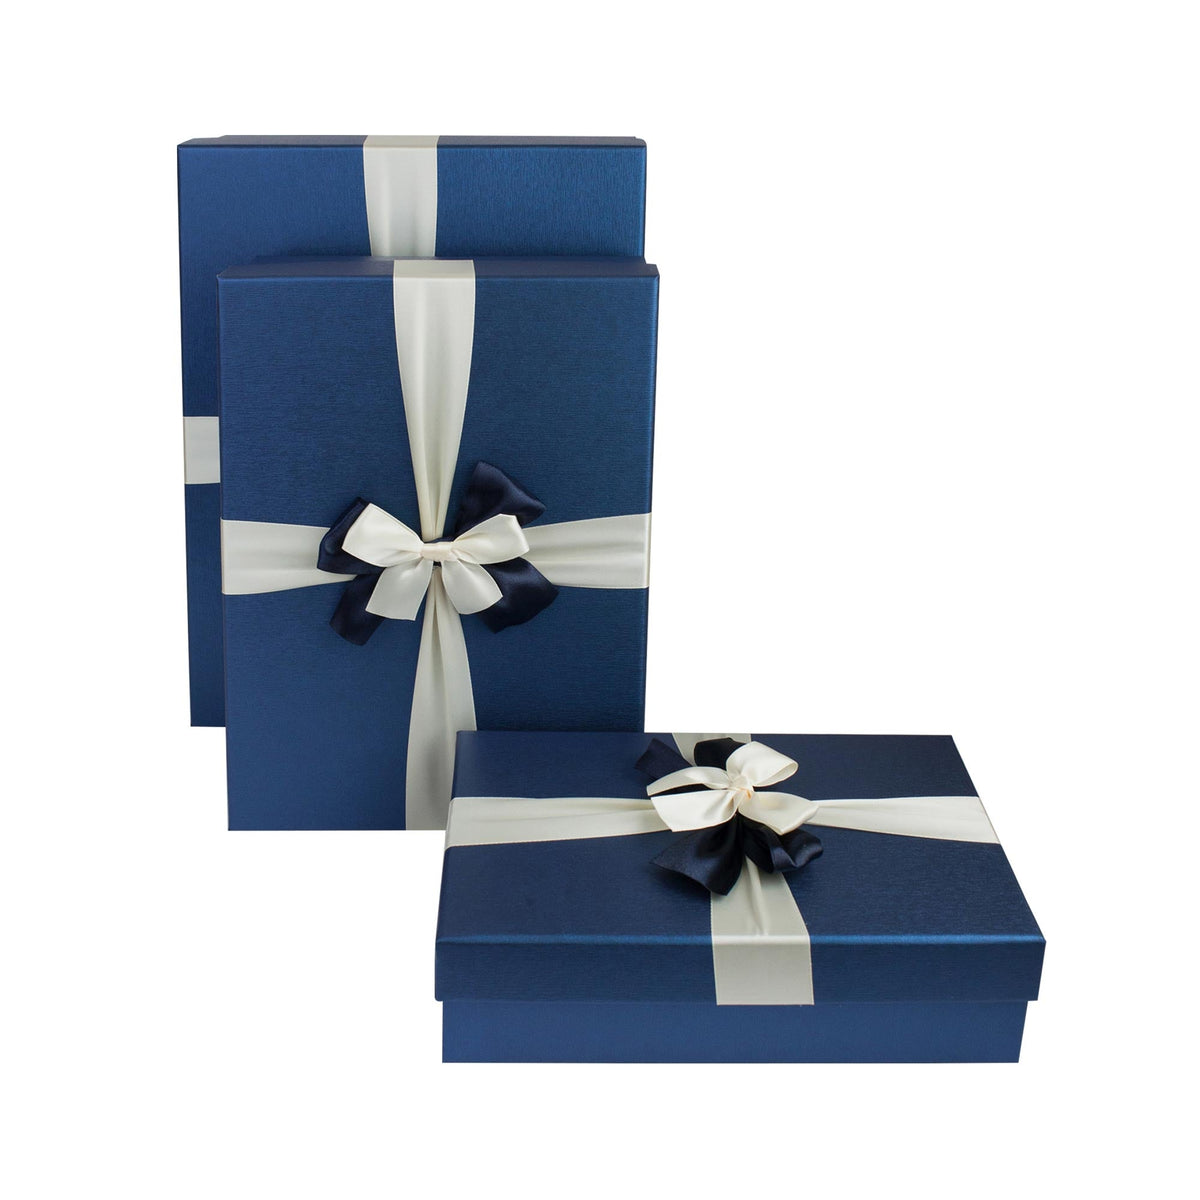 Set of 3 Blue Gift Boxes With Cream Satin Ribbon (Sizes Available)